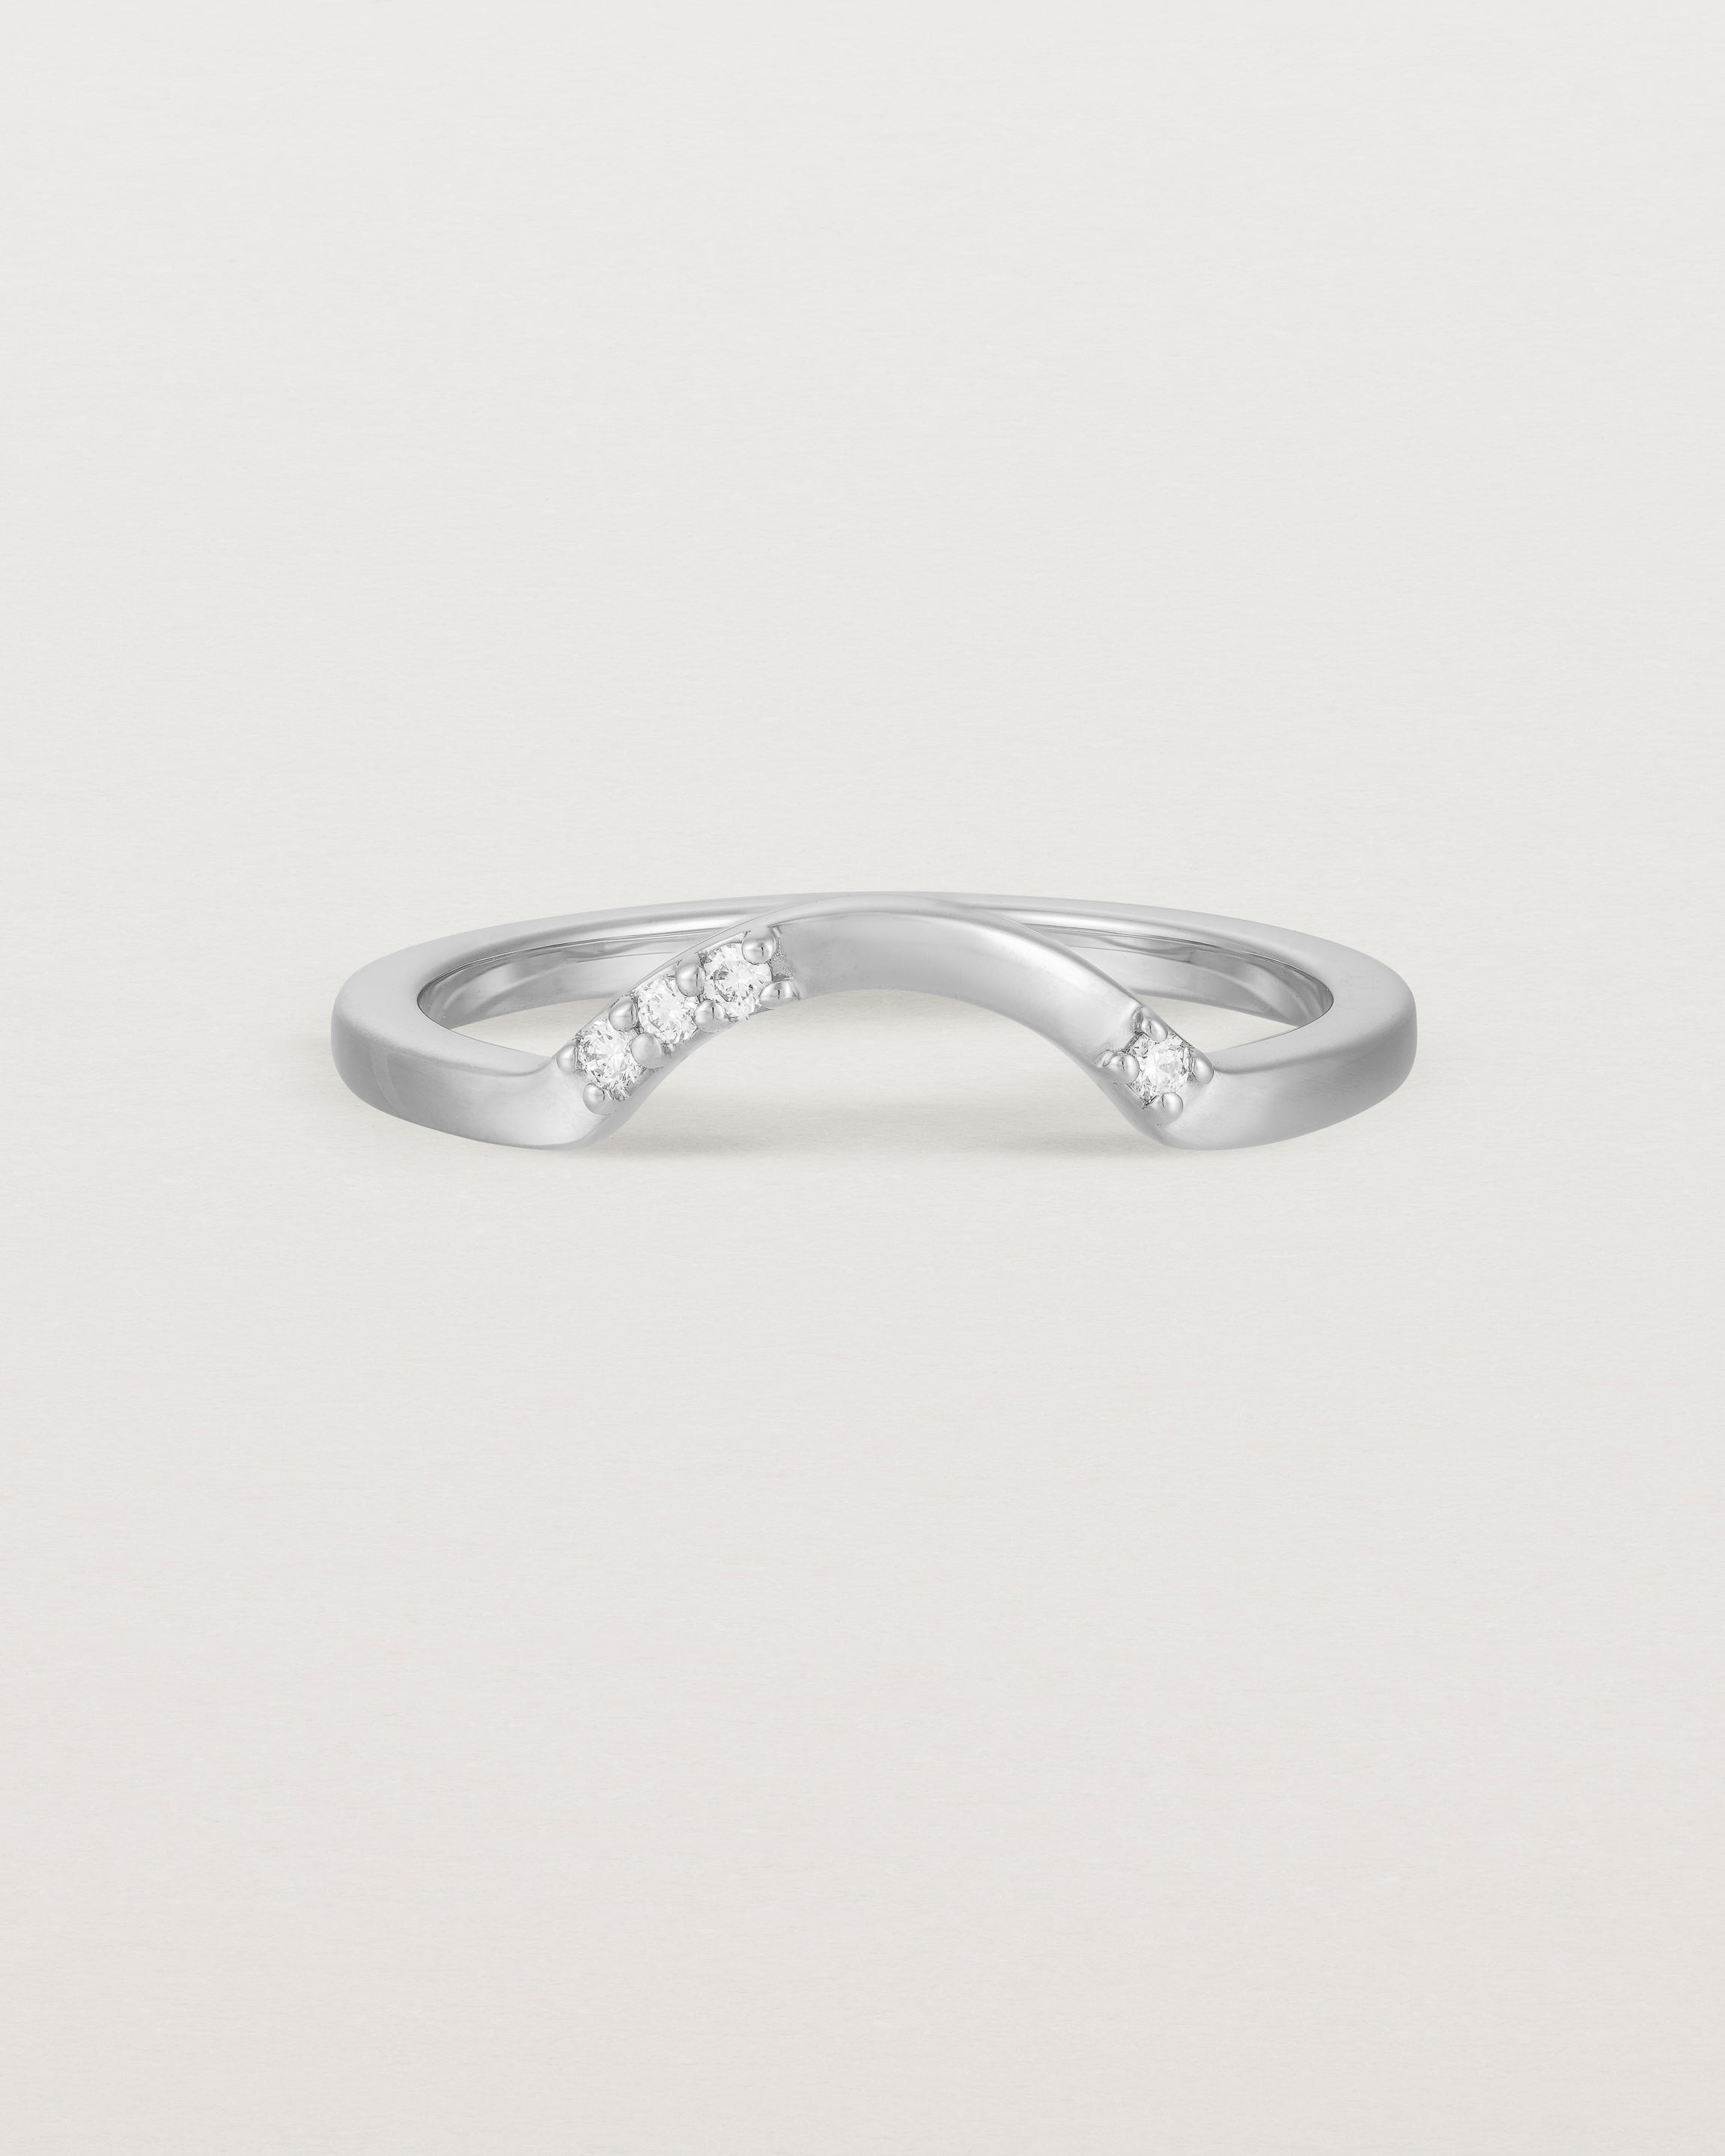 Fit four of a classic arc crown ring featuring scattered white diamonds, crafted in white gold